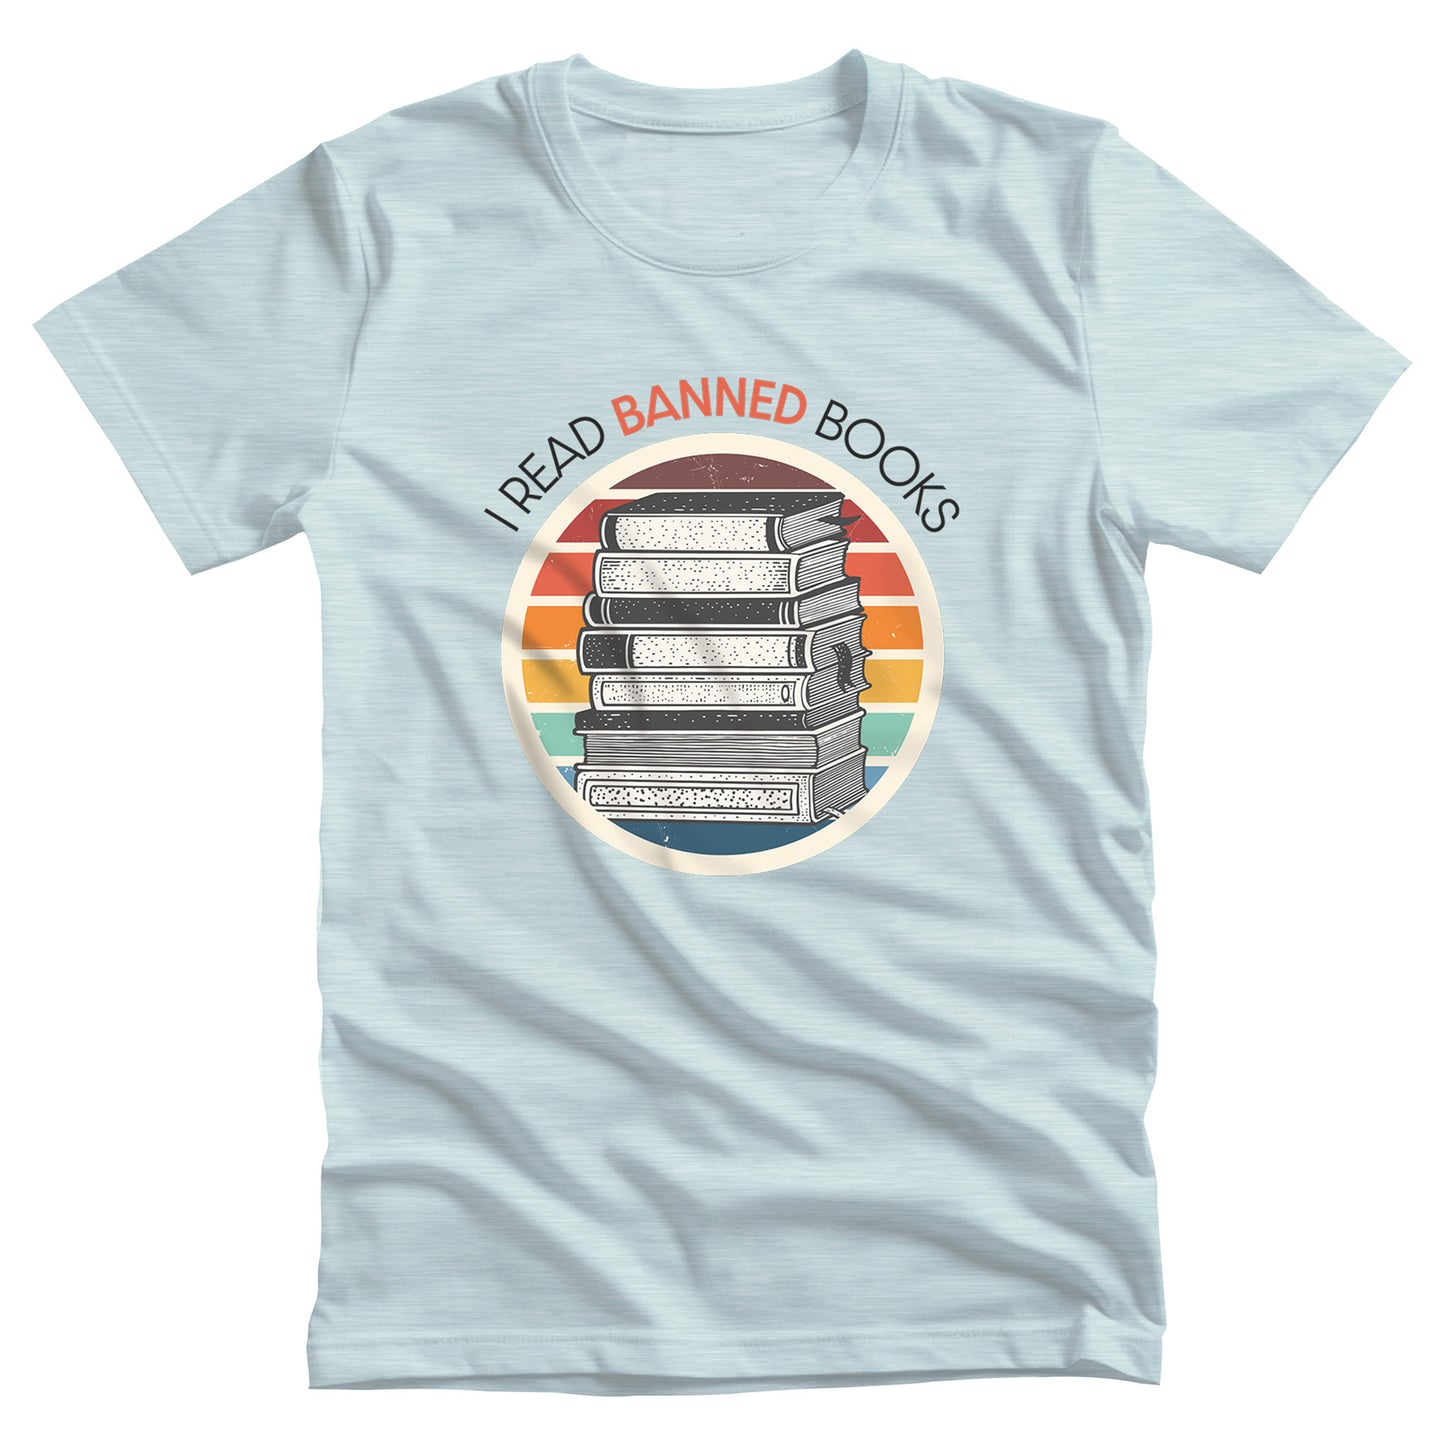 Heather Ice Blue color unisex t-shirt with a circular graphic of stacked old books with a vintage sunset made from horizontal lines behind it. “I READ BANNED BOOKS” is arched over the graphic with the word. “BANNED” an orange color.